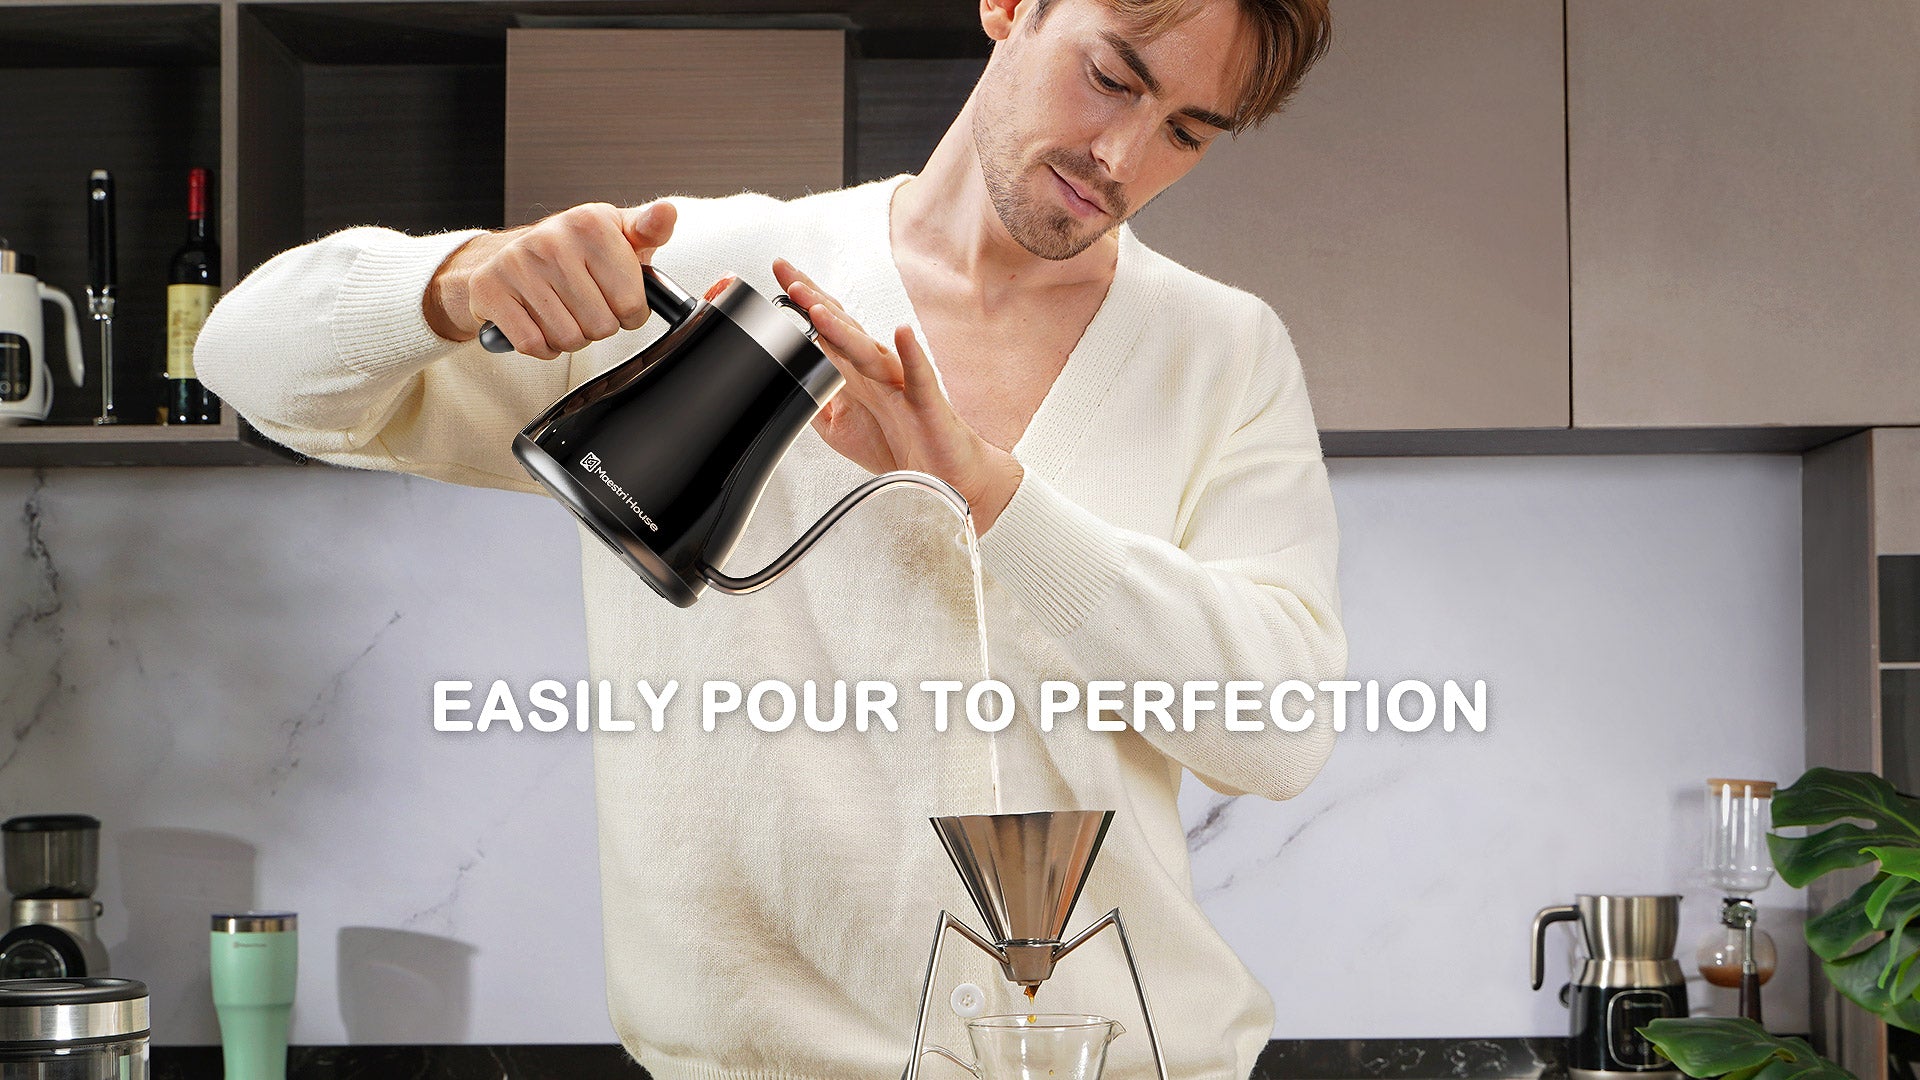 Maestri House Electric Gooseneck Kettle review - hot water, with a few  extras - The Gadgeteer